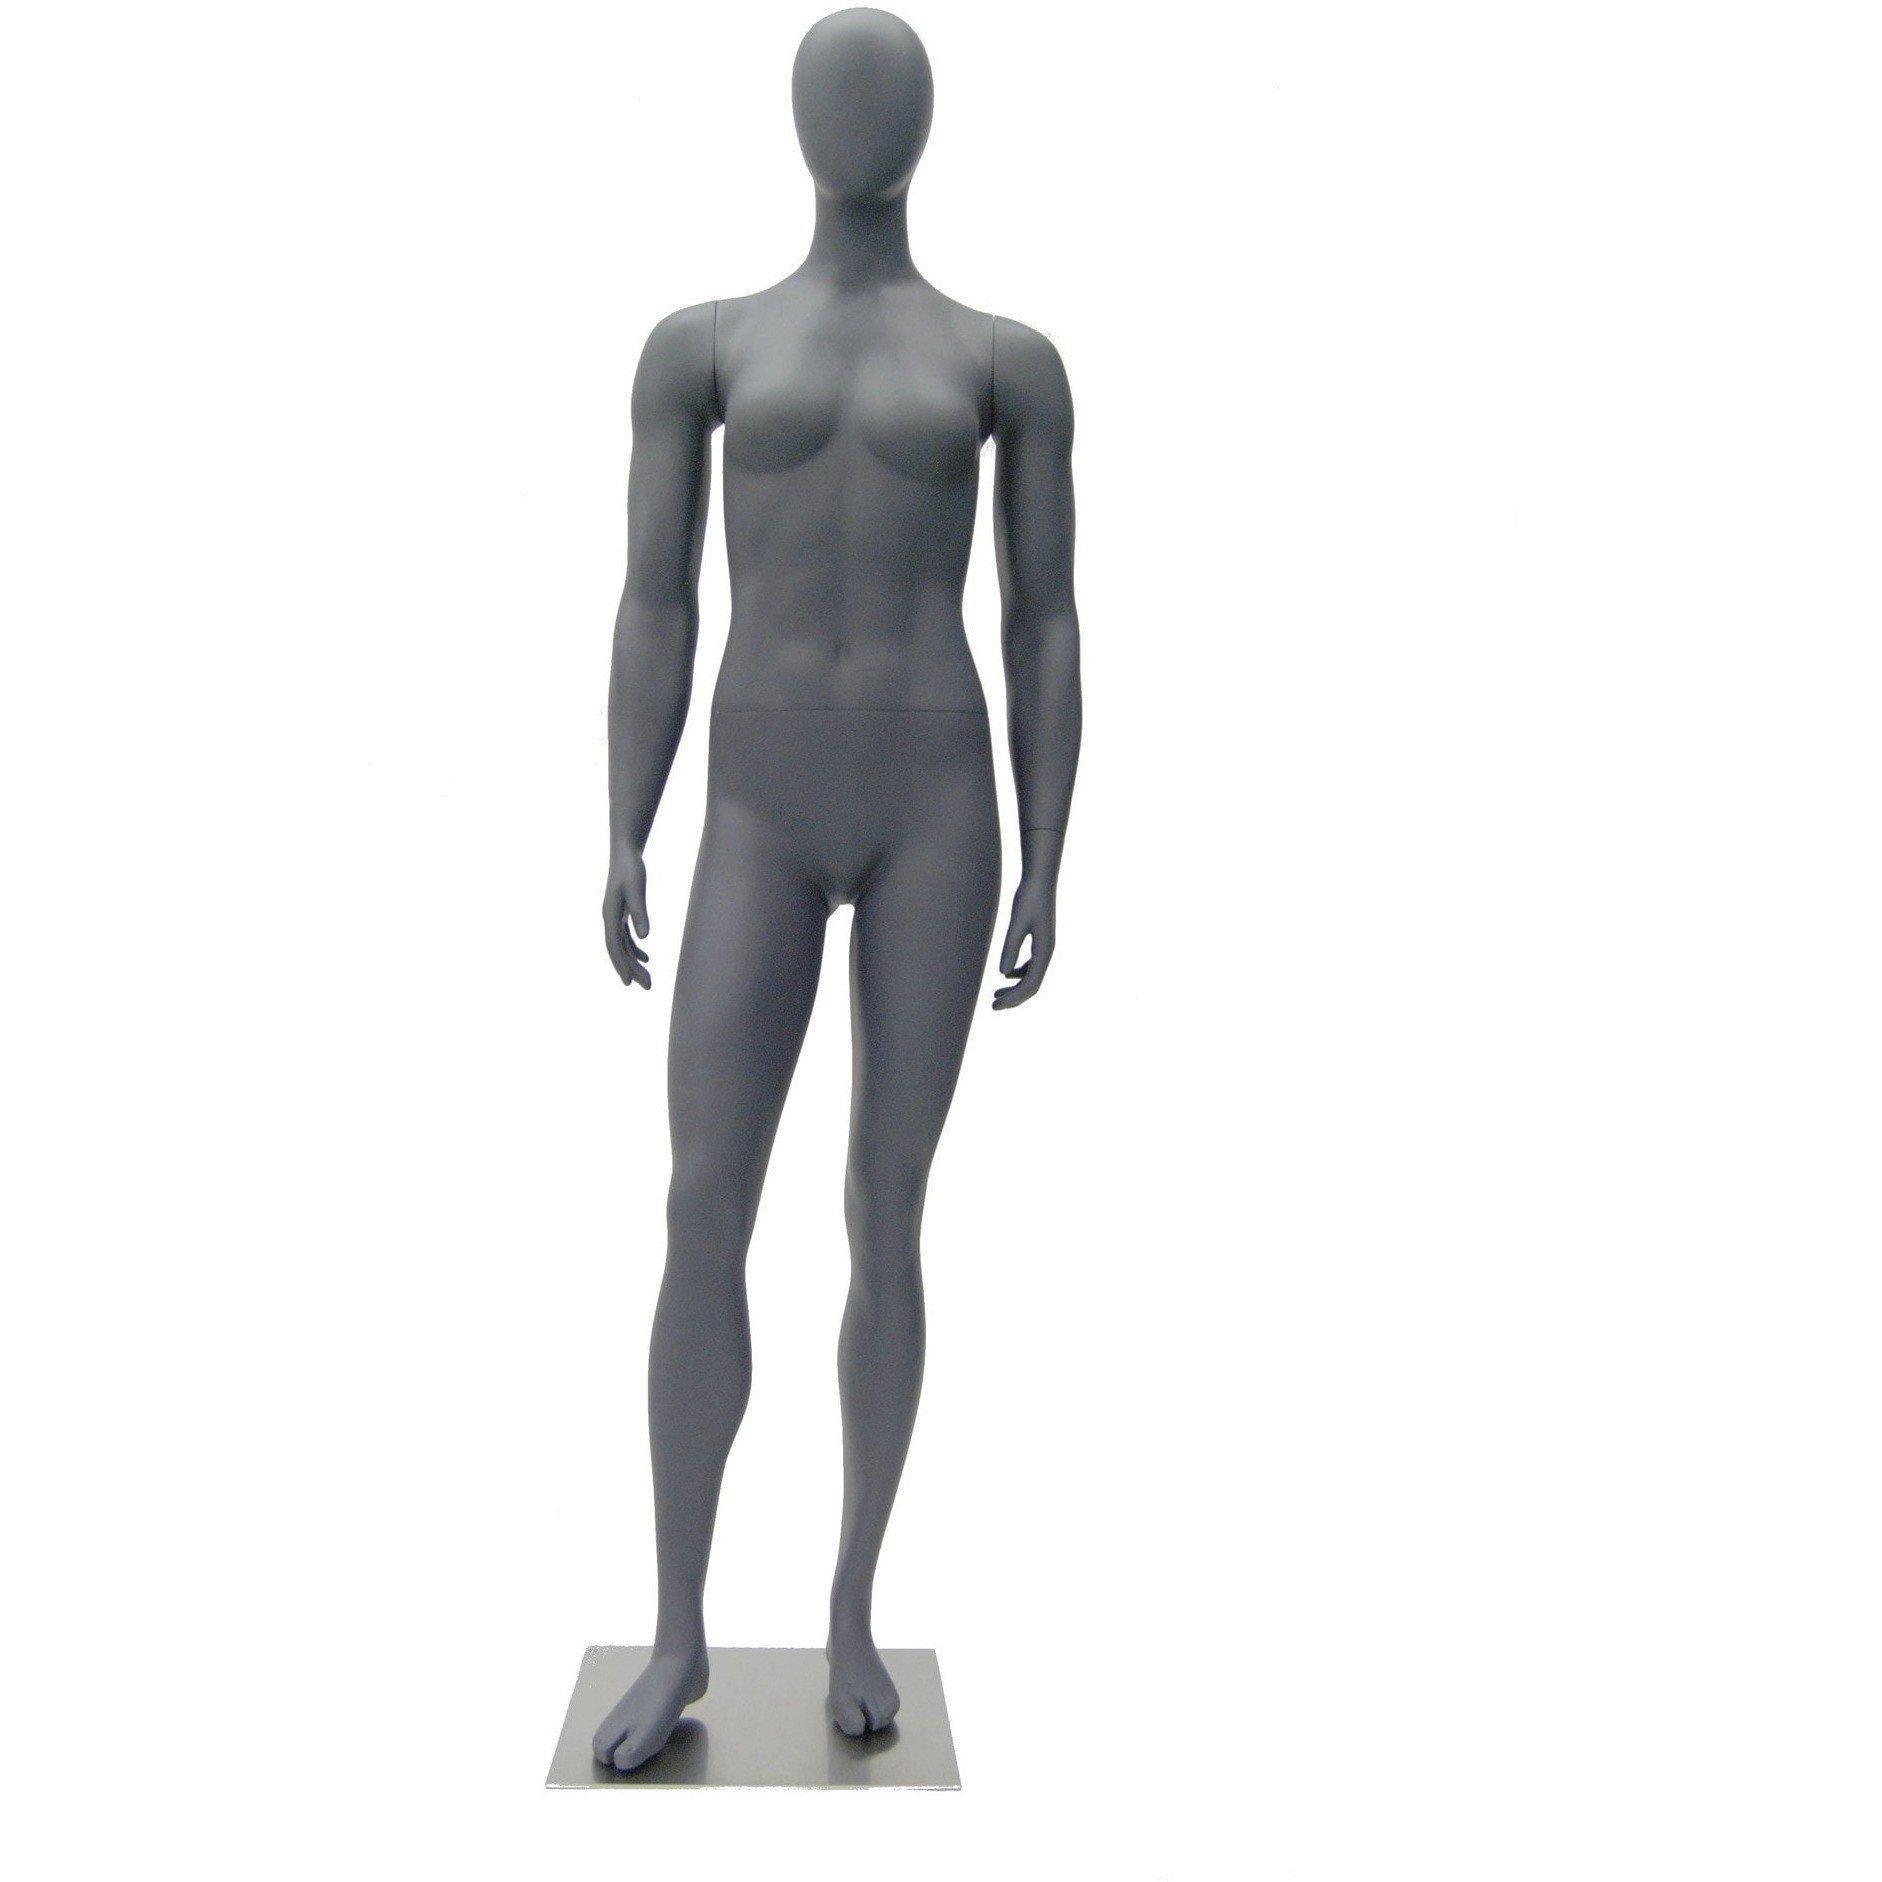 PP Full Body Realistic Female Display Head Mannequin for  Shoppingmall/Clothing Store - China Sport Mannequin and Shop Manikin for  Sale price